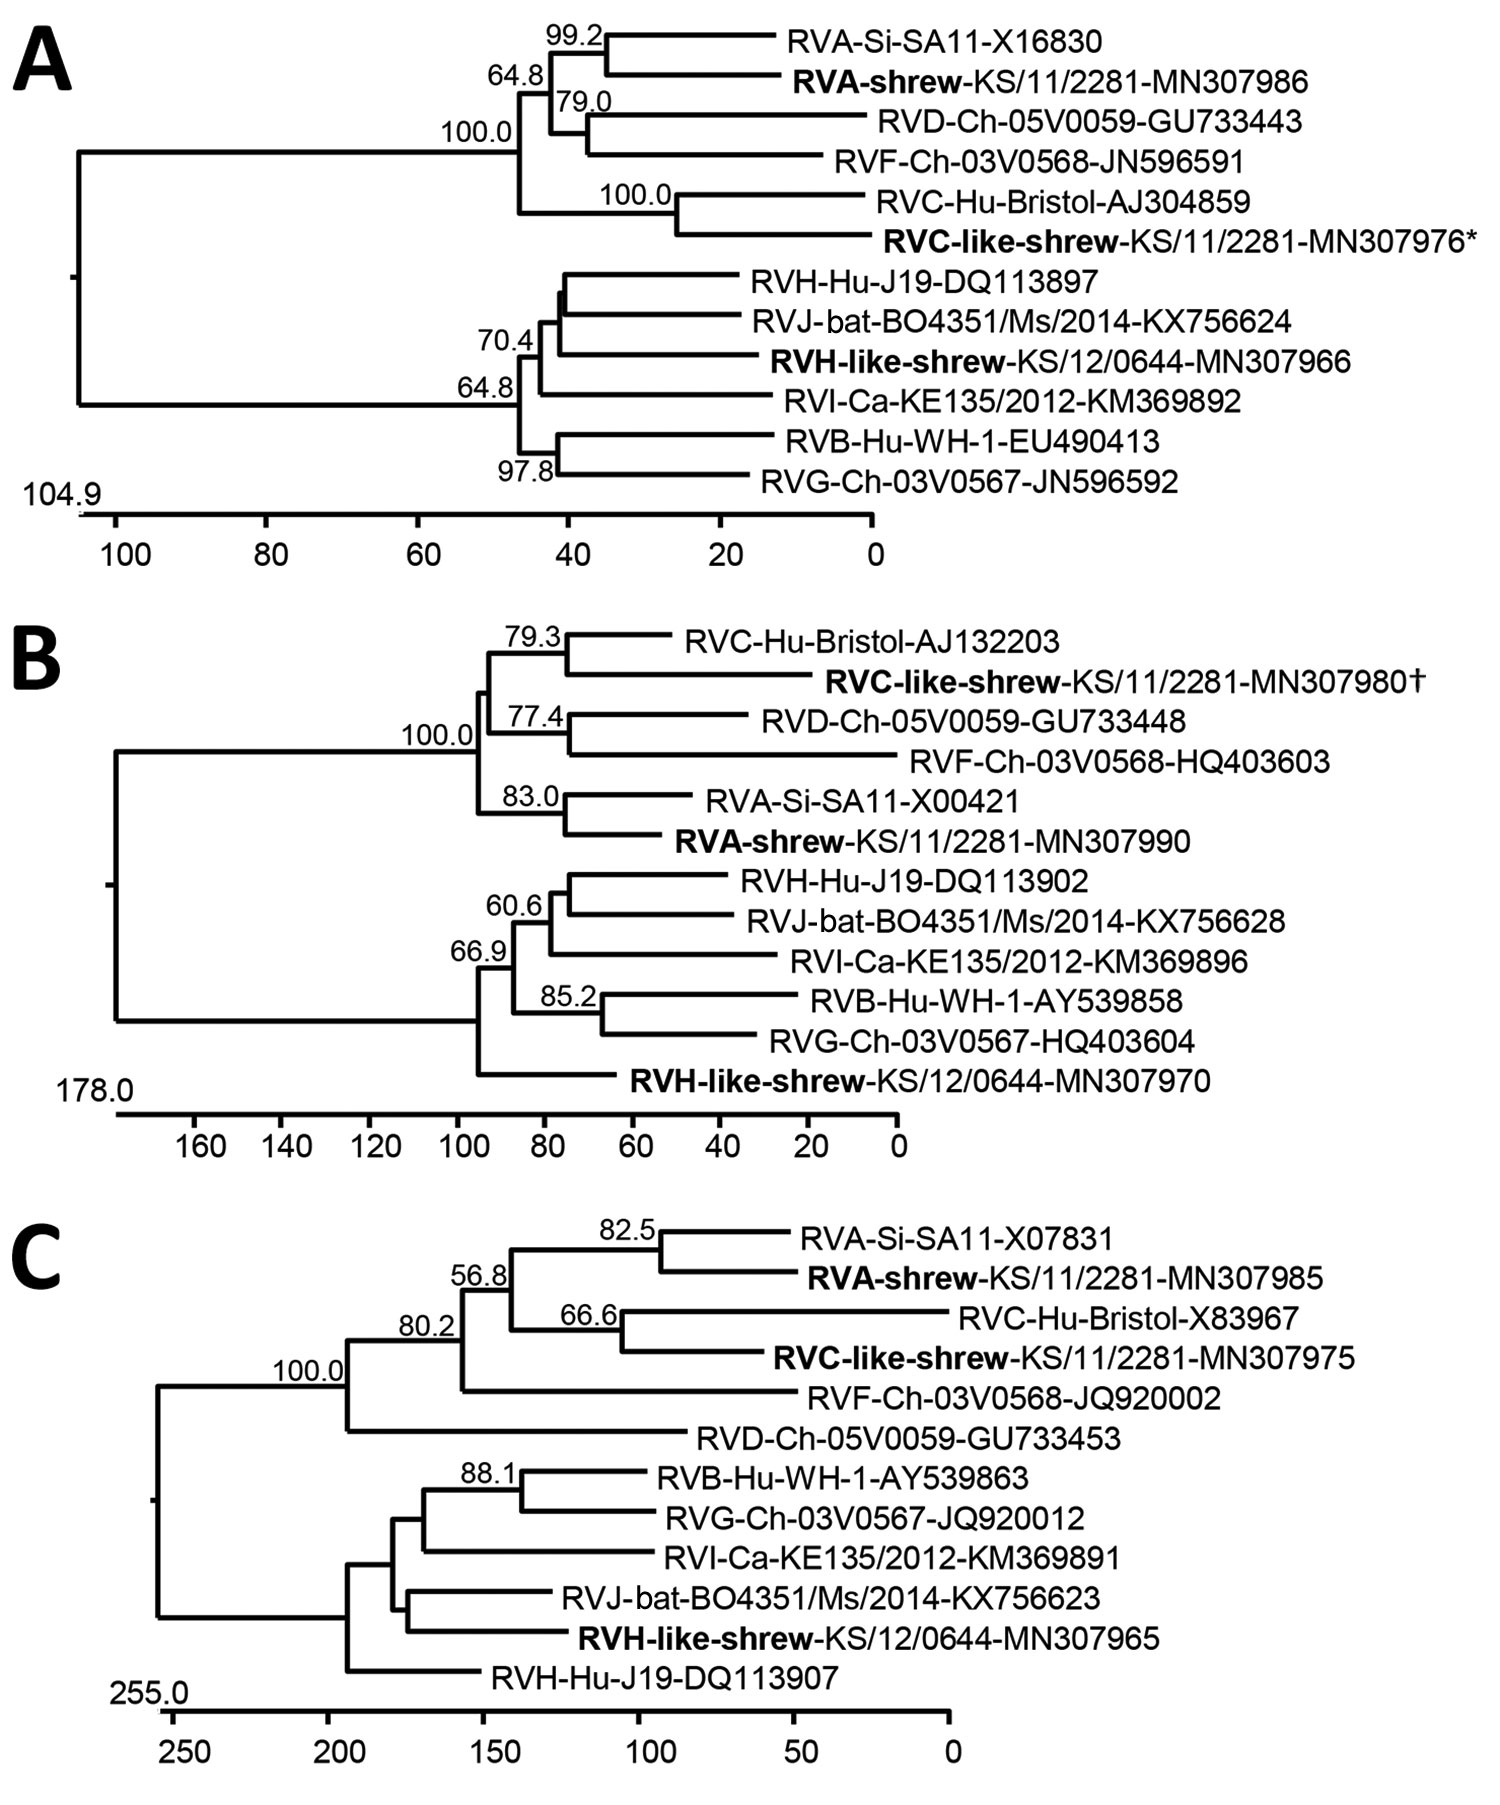 Phylogenetic relationship of shrew rotaviruses (bold), Germany, 2011–2012, with RVA–RVJ determined by using the deduced amino acid sequences of virus protein 1 (A), virus protein 6 (B), and nonstructural protein 5 (C). Trees were constructed by using a neighbor-joining method implemented in the MegAlign module of DNASTAR (https://www.dnastar.com) and a bootstrap analysis with 1,000 trials and 111 random seeds. Bootstrap values of &gt;50% are shown. The rotavirus species, host, strain or sample d